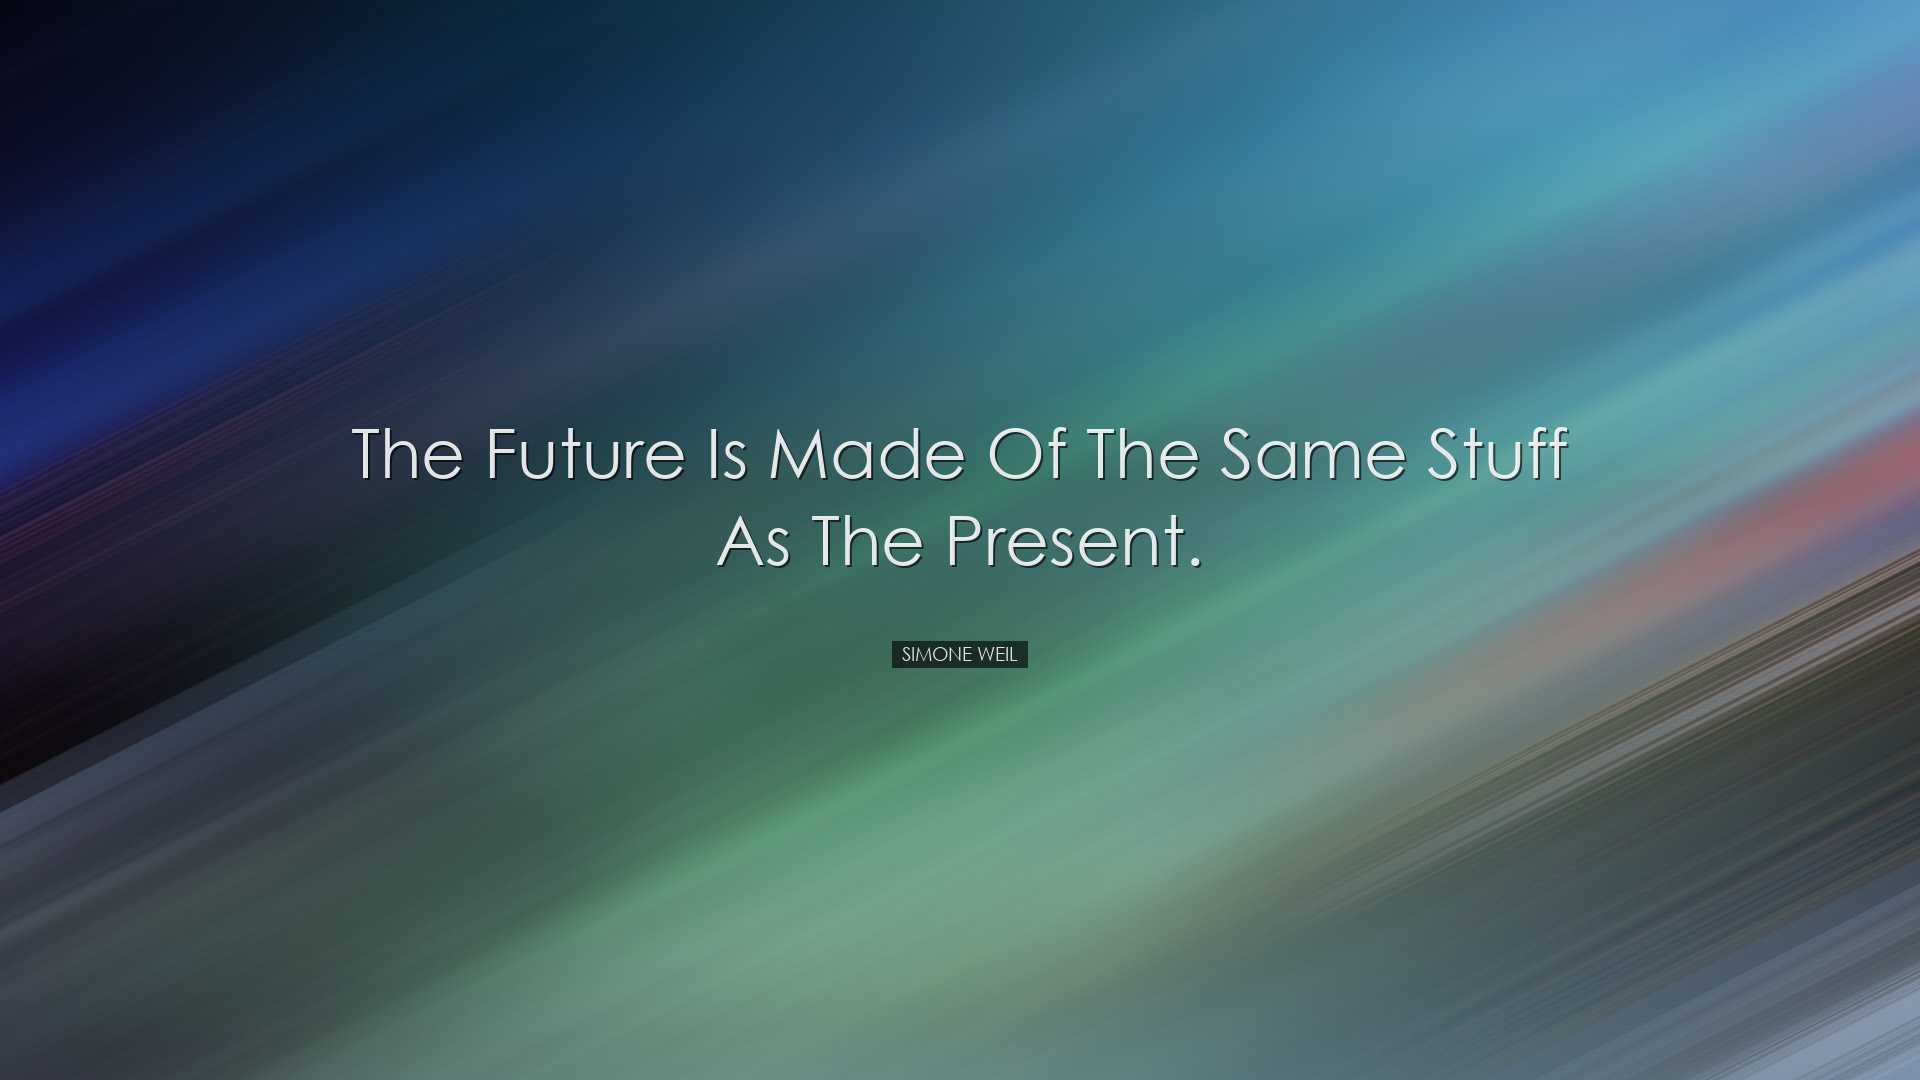 The future is made of the same stuff as the present. - Simone Weil